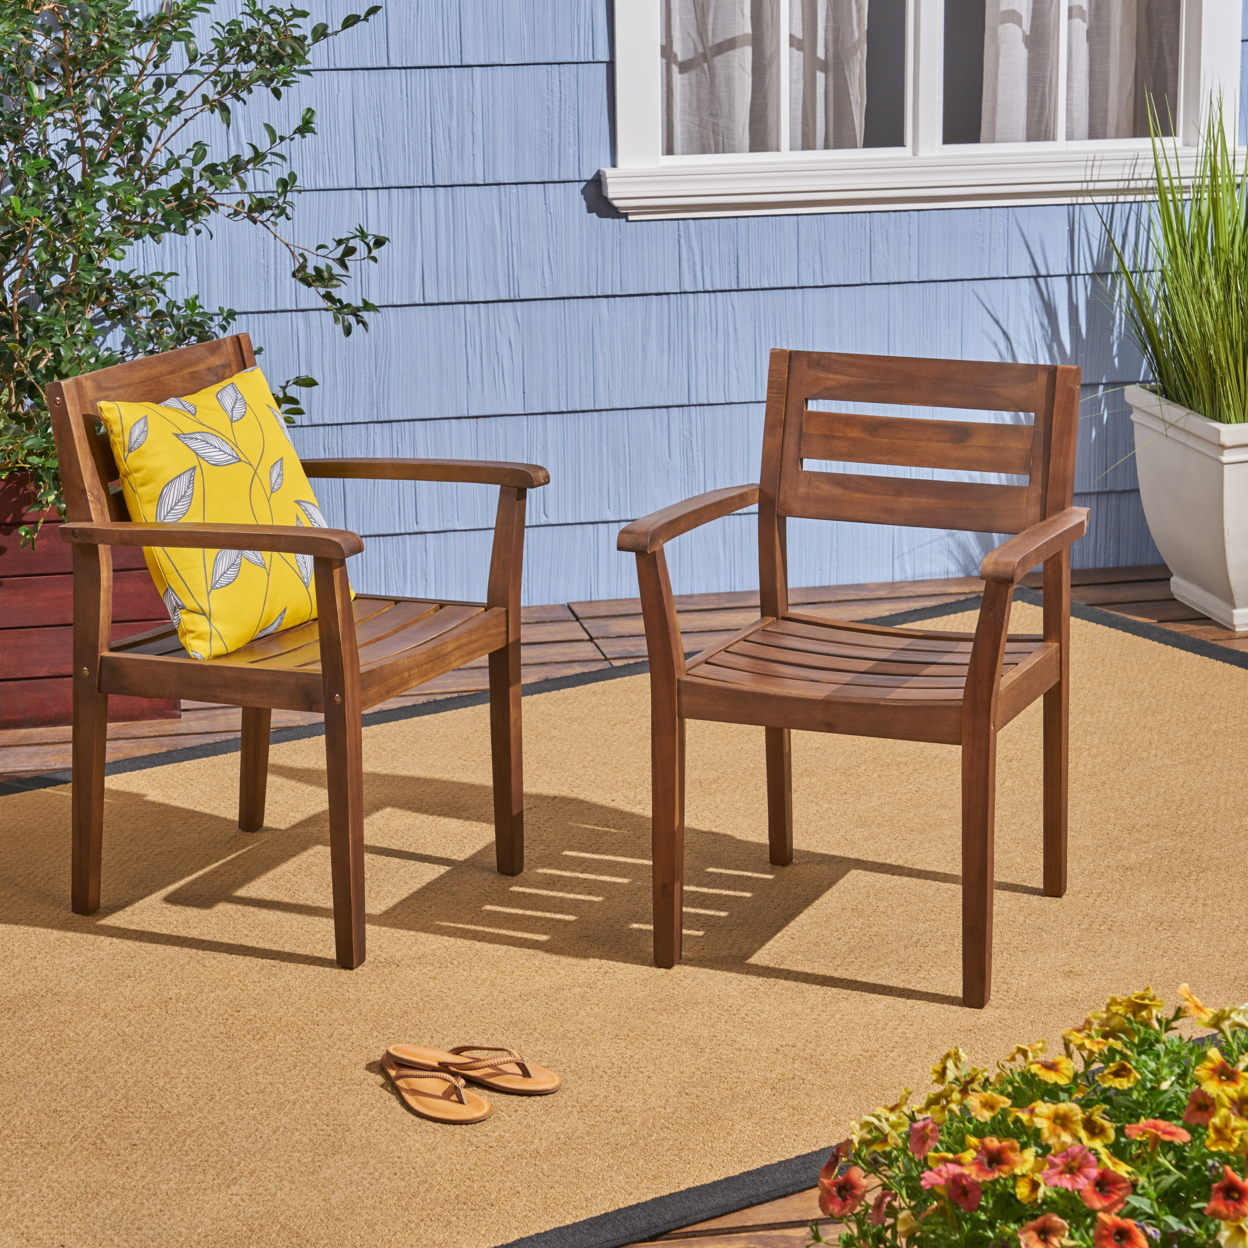 Stanford Outdoor Rustic Acacia Wood Dining Chairs With Slat Seats (Set Of 2) - Dark Brown